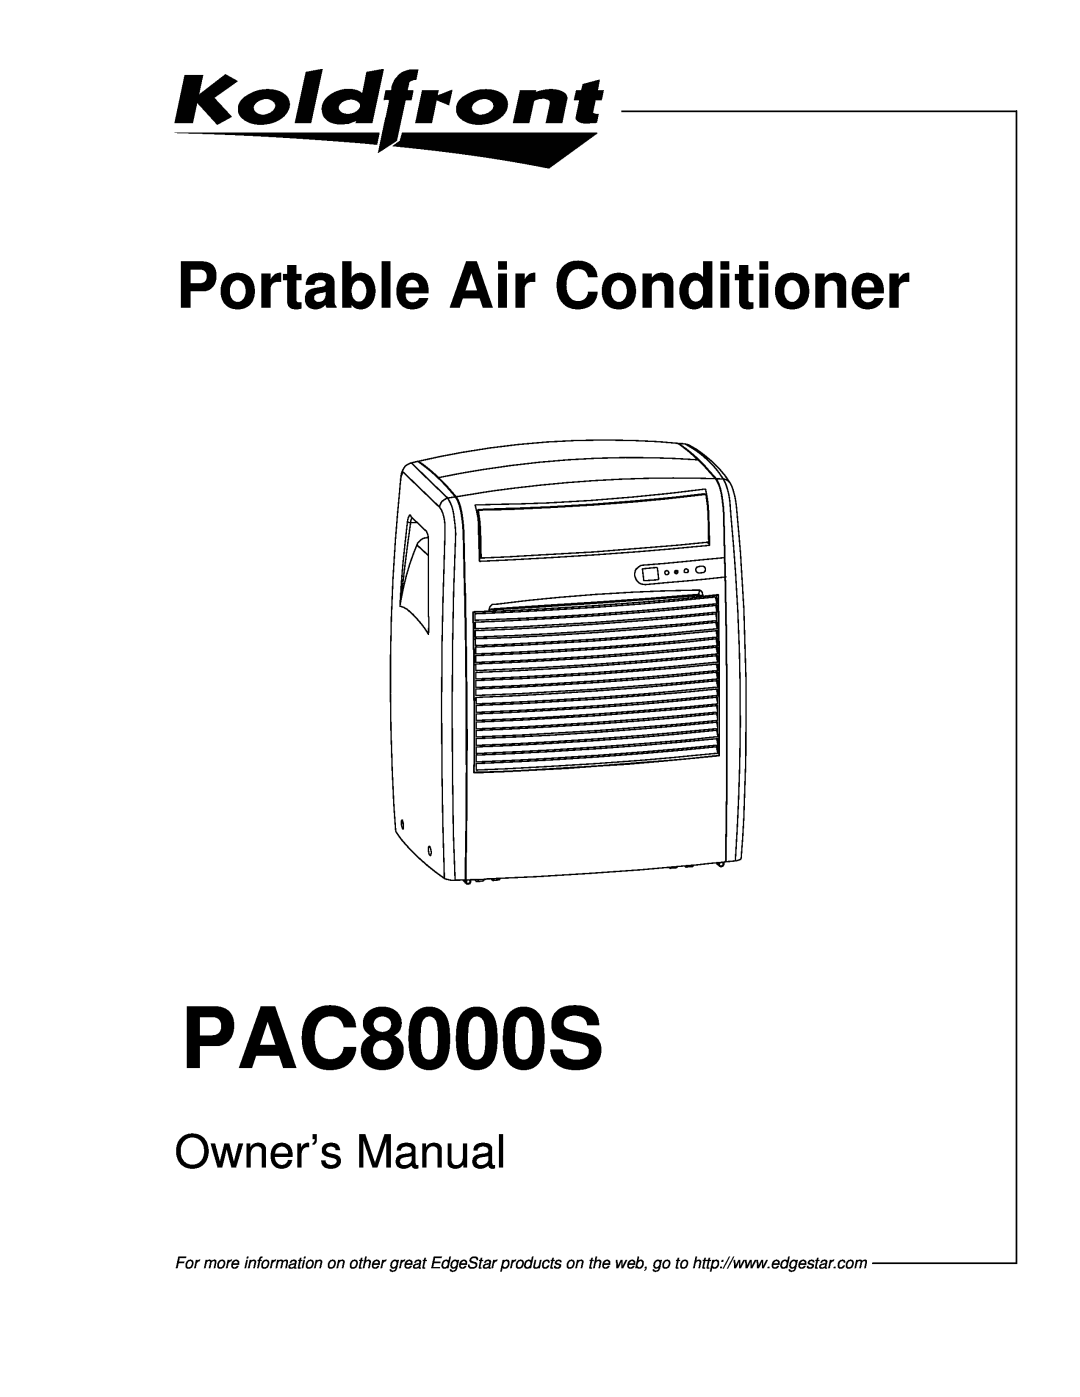 KoldFront PAC8000S owner manual Portable Air Conditioner 